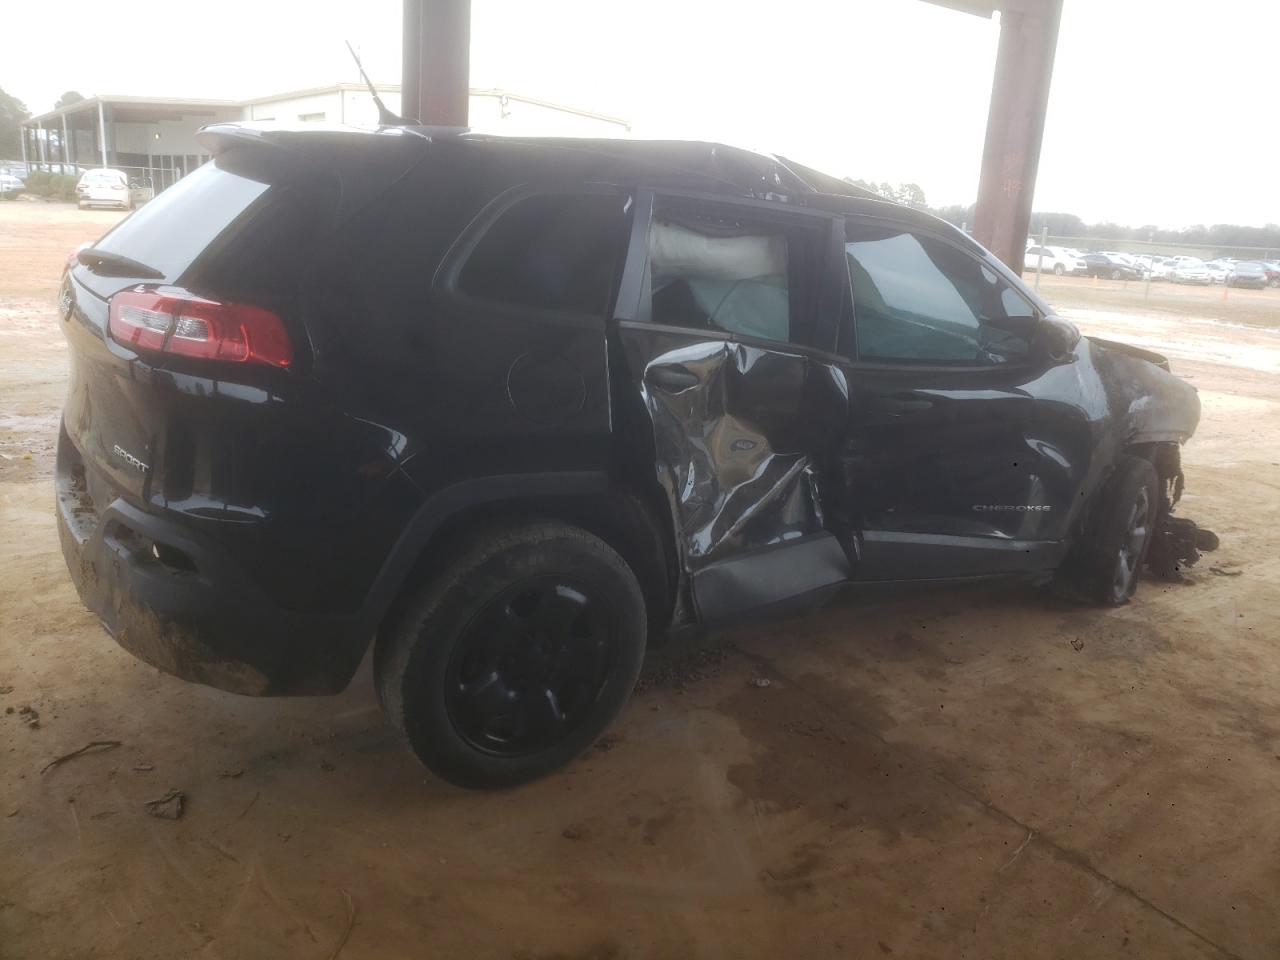 1C4PJLAB1GW****** Salvage and Repairable 2016 Jeep Cherokee in AL - Tanner